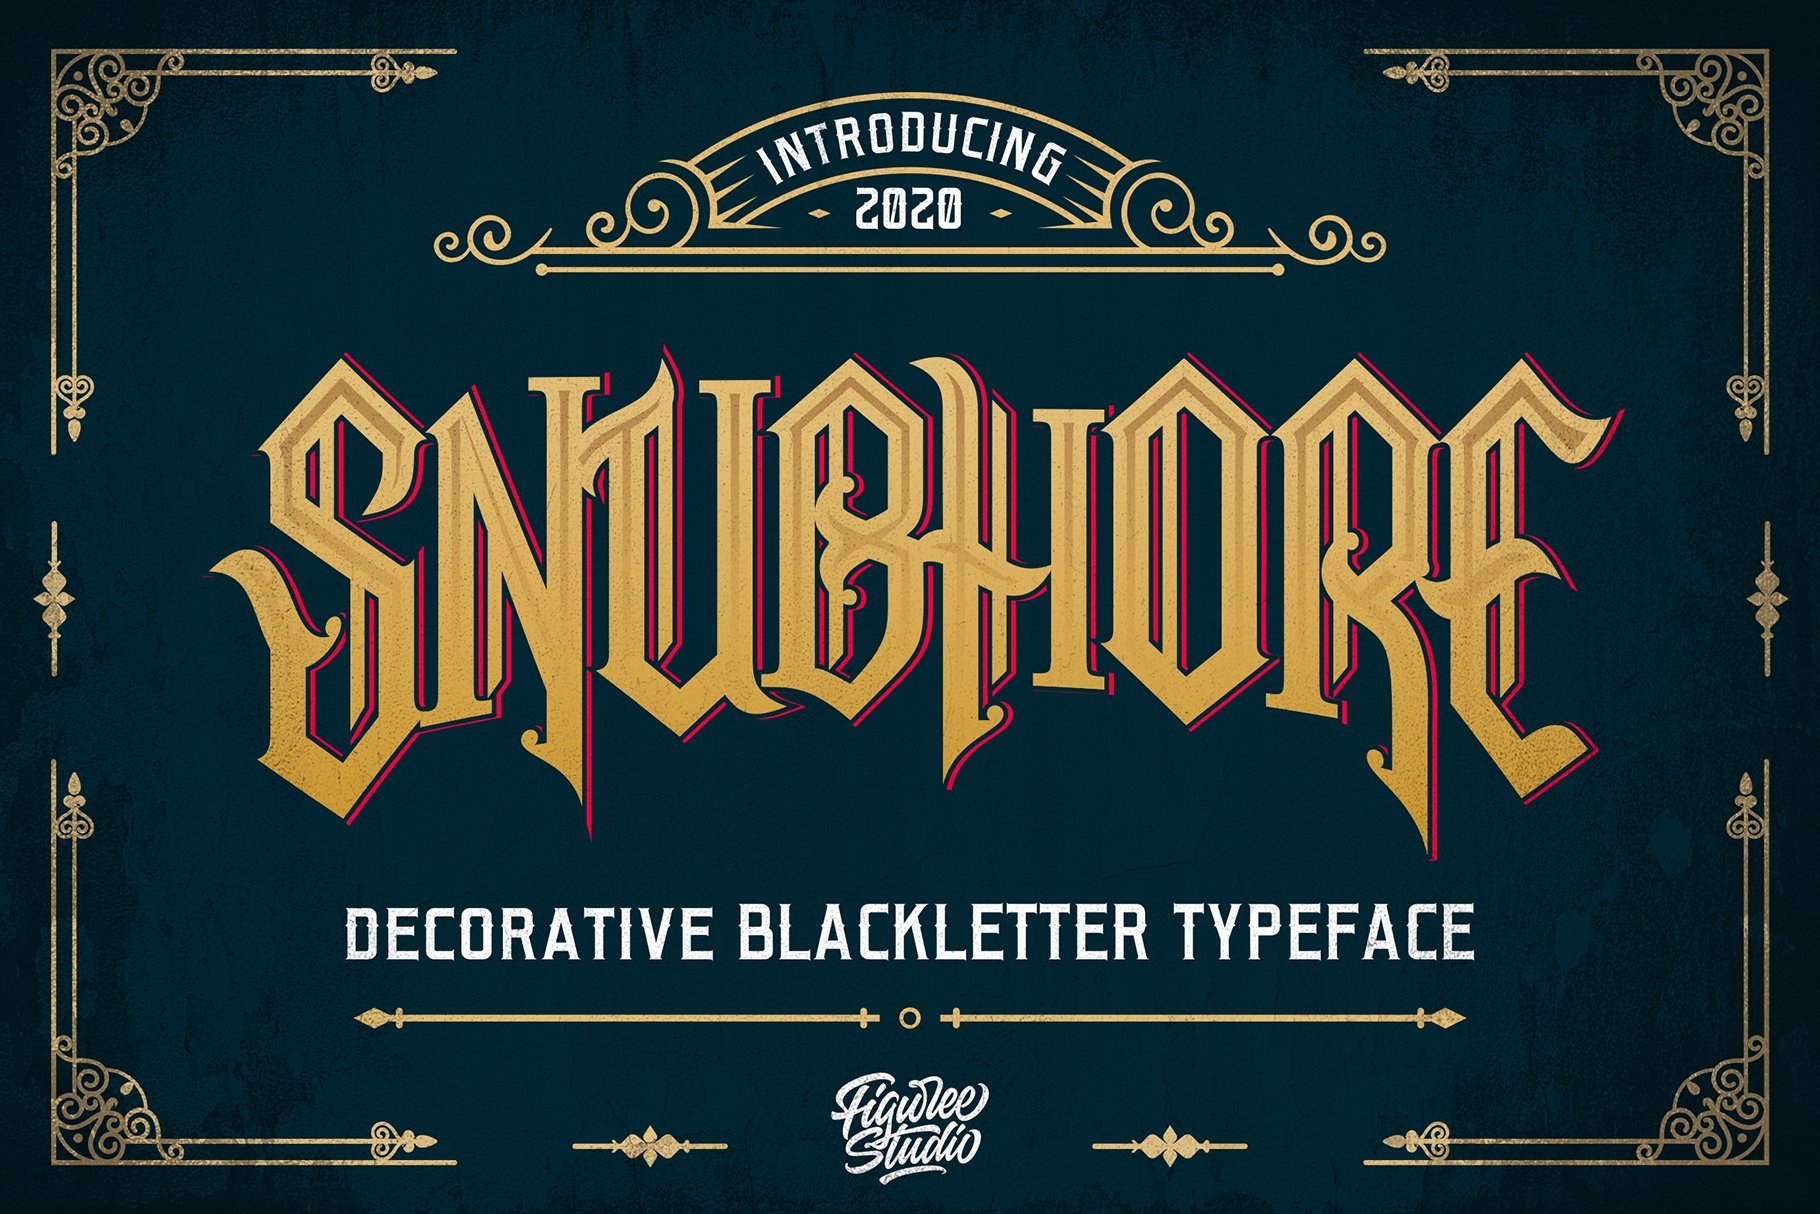 Snubhore - Gothic Typeface cover image.